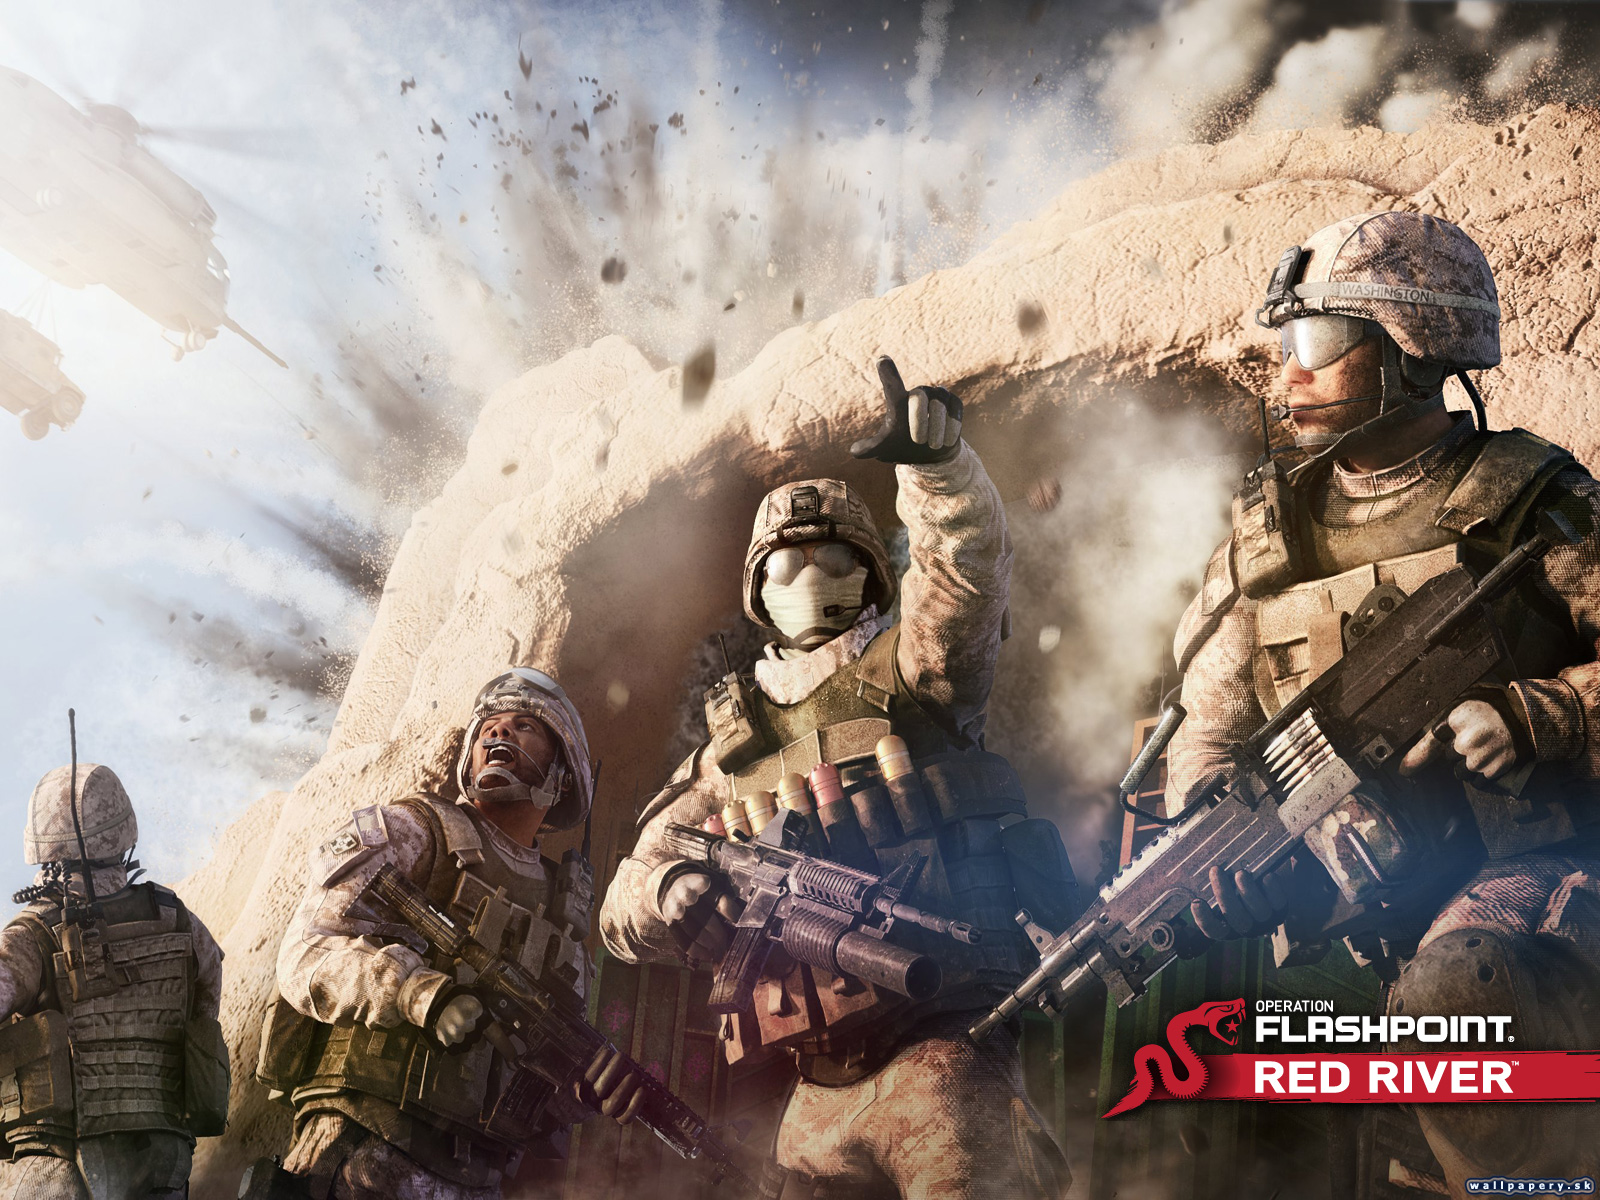 Operation Flashpoint: Red River - wallpaper 6